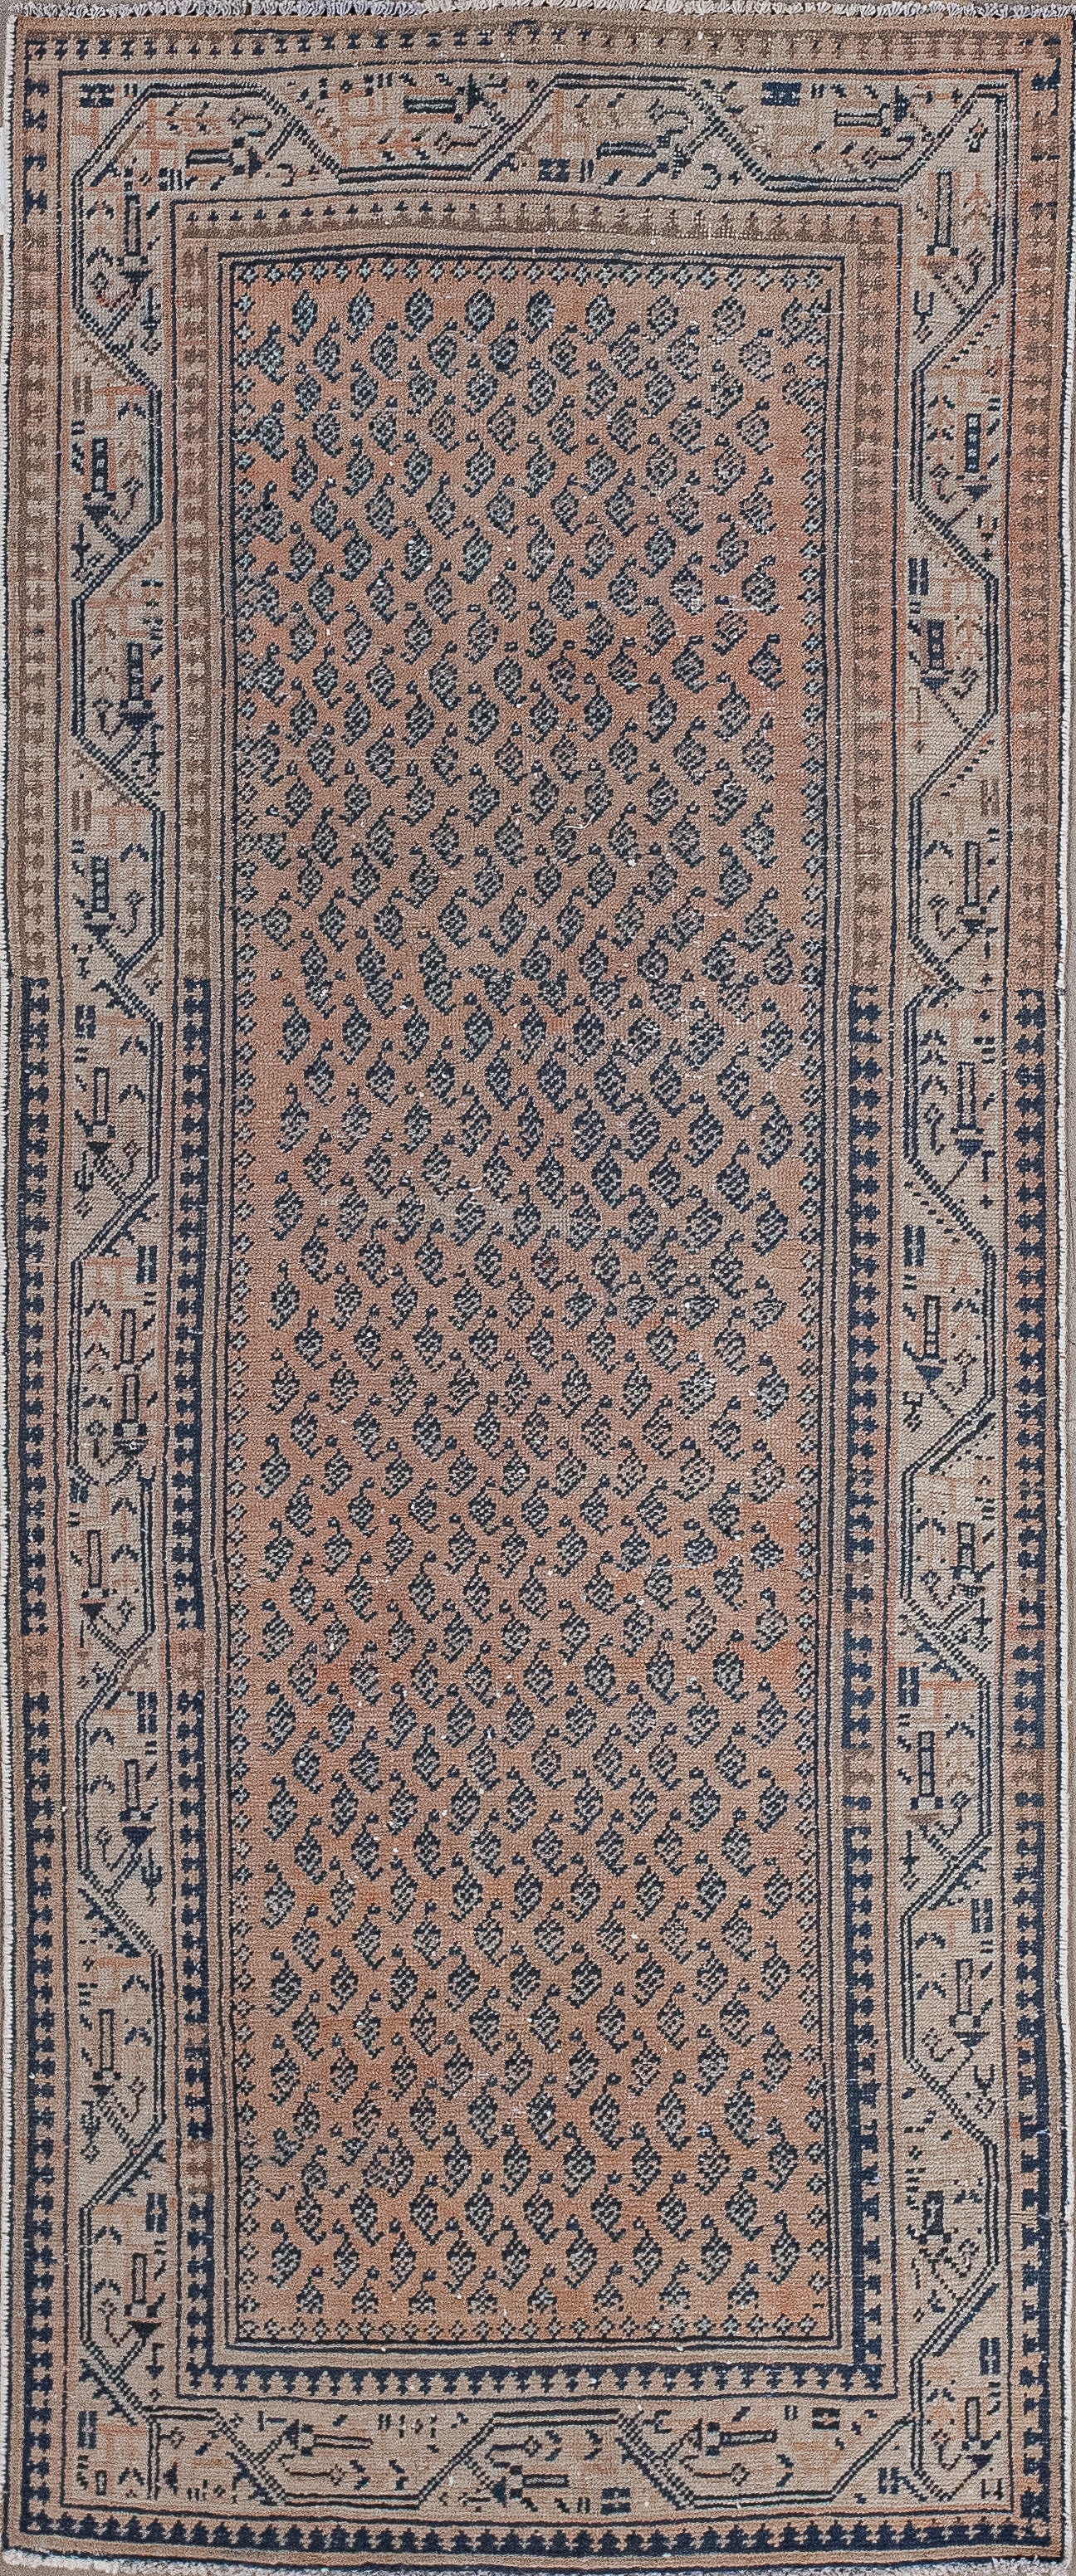 This comfortable rug comes in a handy size because you can use it for a workshop, a fishing shop, and/or a hallway. The warm color scheme has shades of copper, beige, brown and blue.